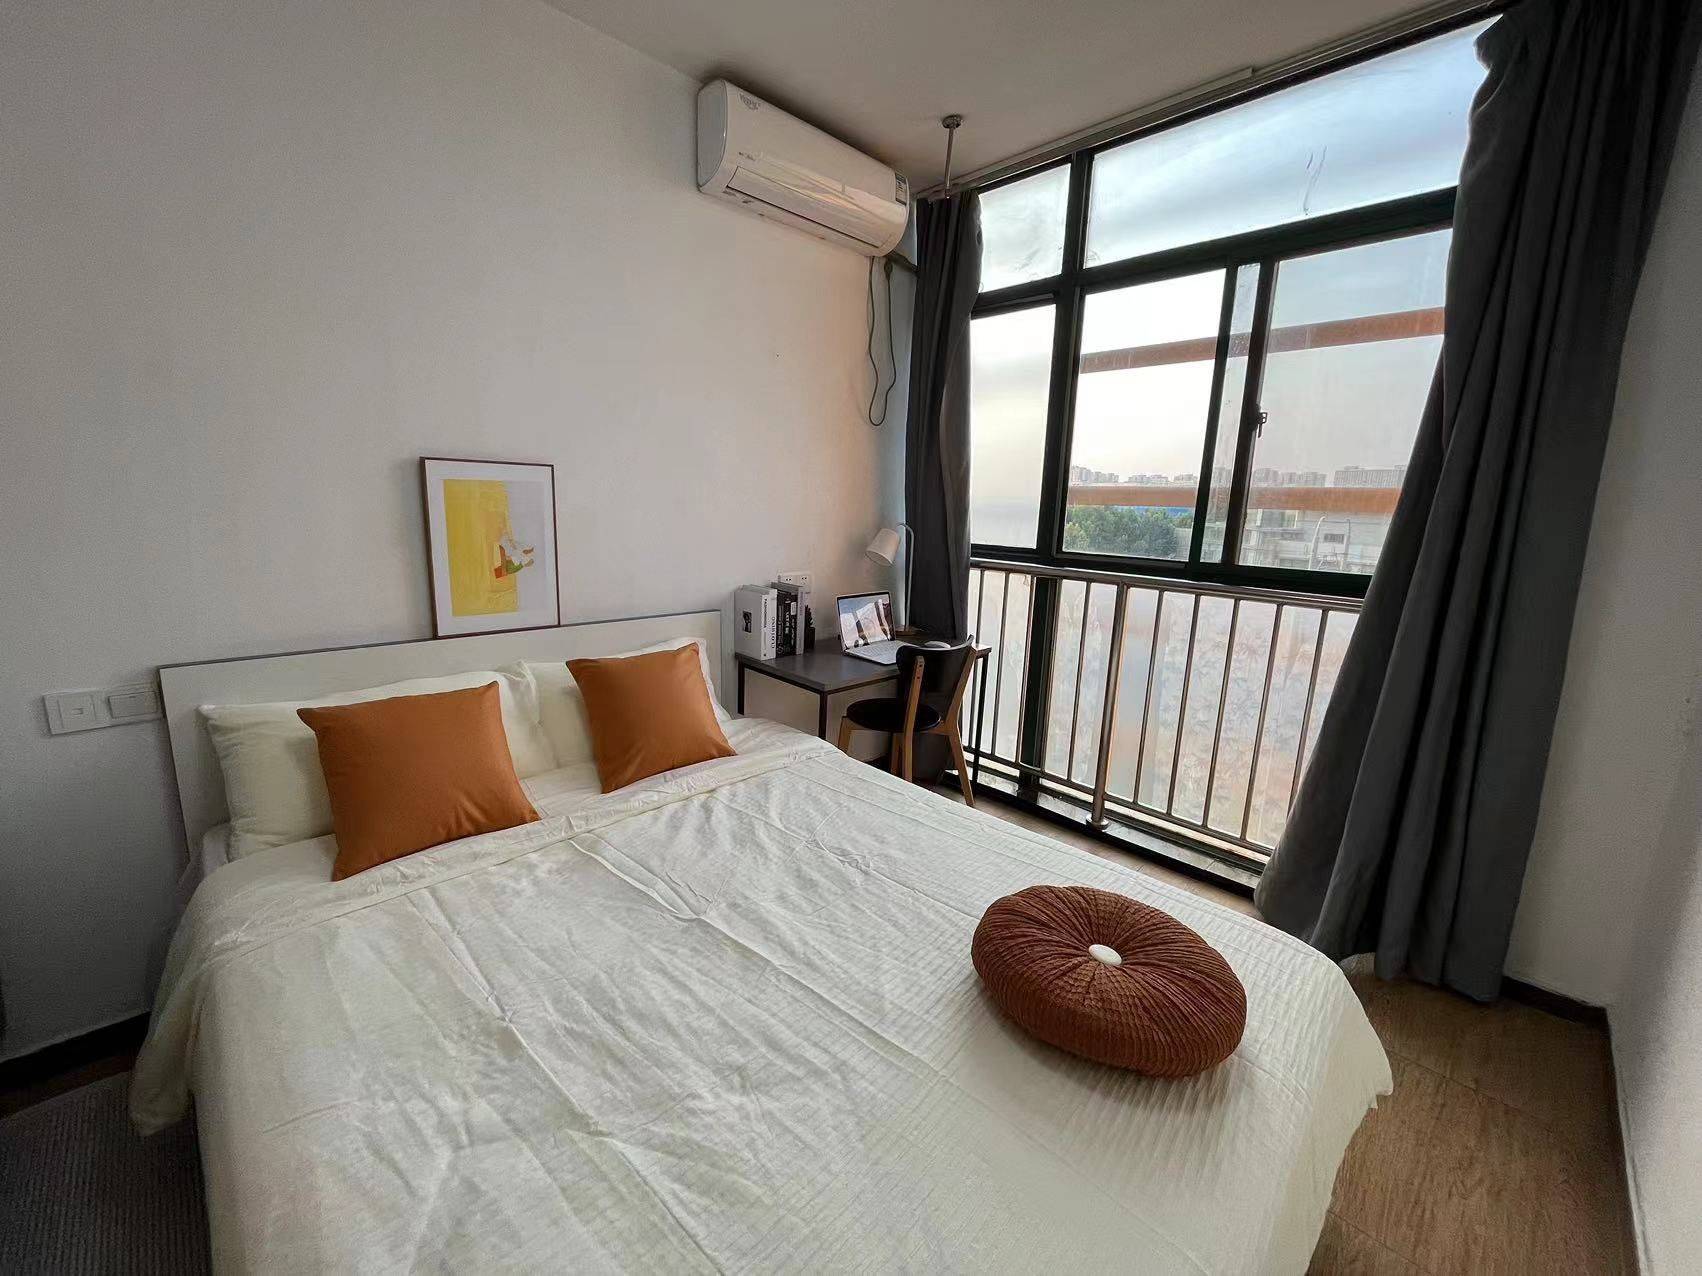 Nanjing-Jiangning-Cozy Home,Clean&Comfy,No Gender Limit,Hustle & Bustle,Chilled,LGBTQ Friendly,Pet Friendly